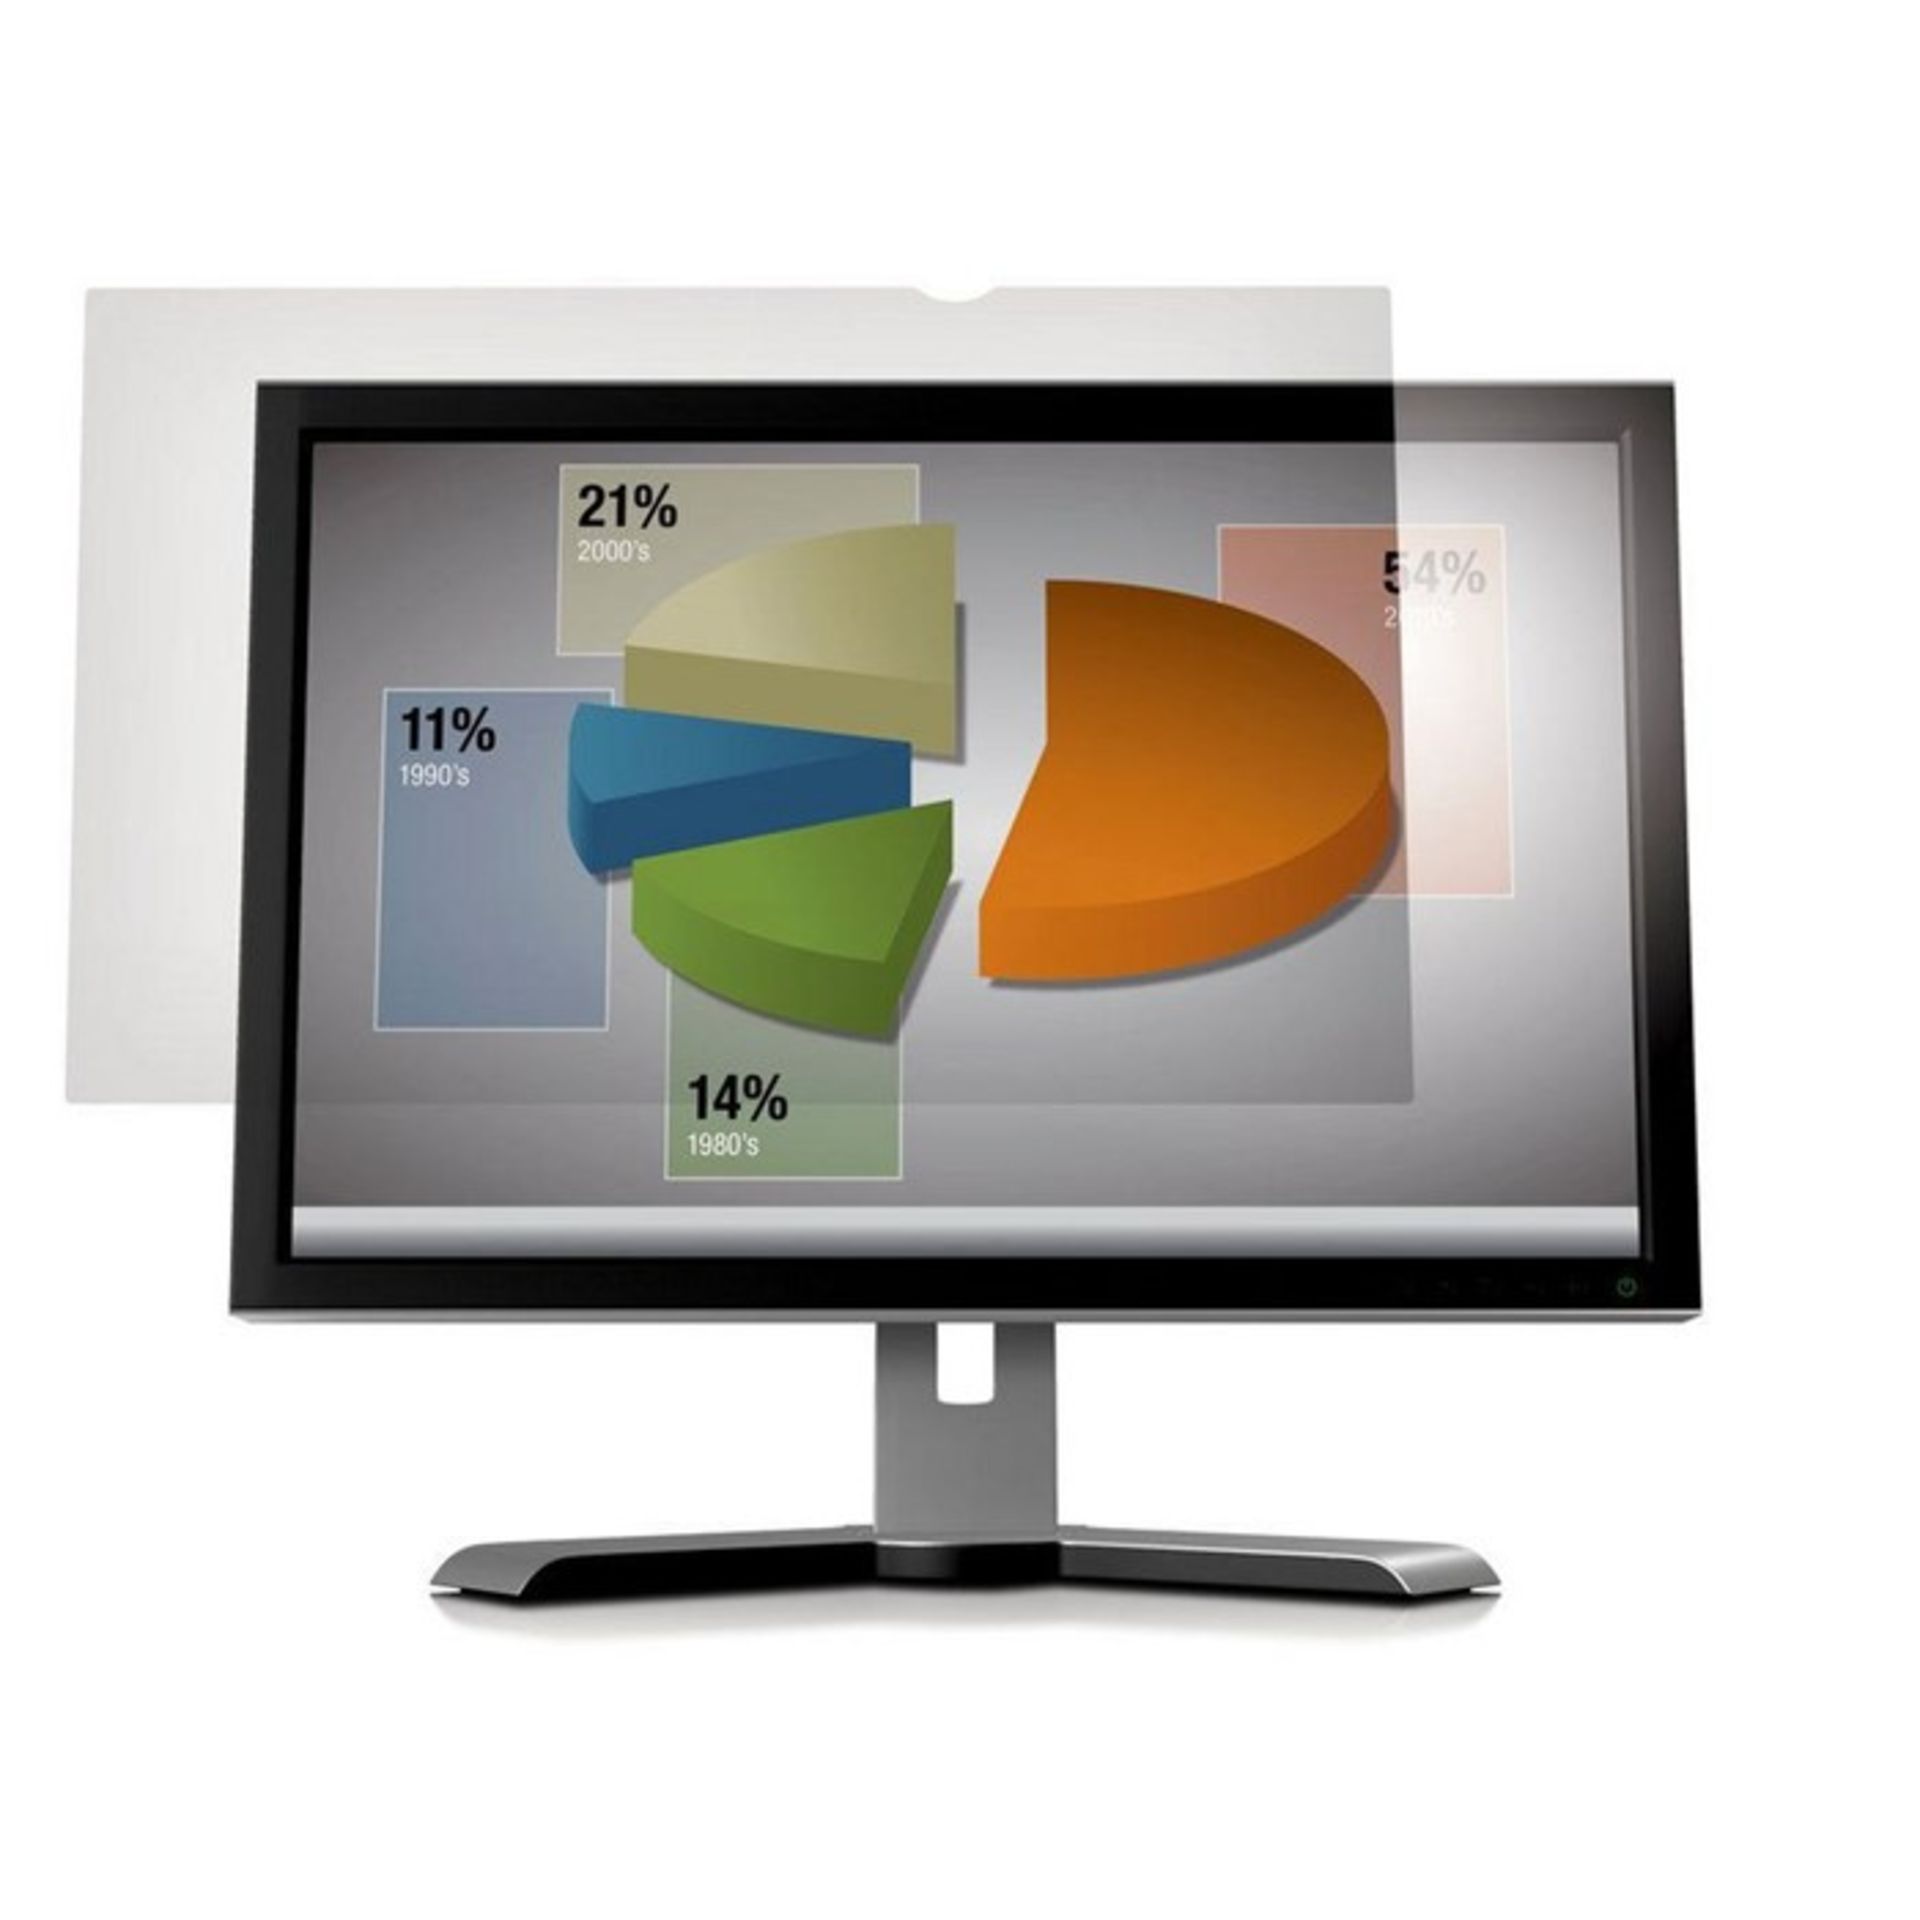 1 AS NEW BOXED ANTI GLARE FILTER FOR 24 WIDESCREEN MONITOR (P/N - 44) / RRP £209.00 (VIEWING